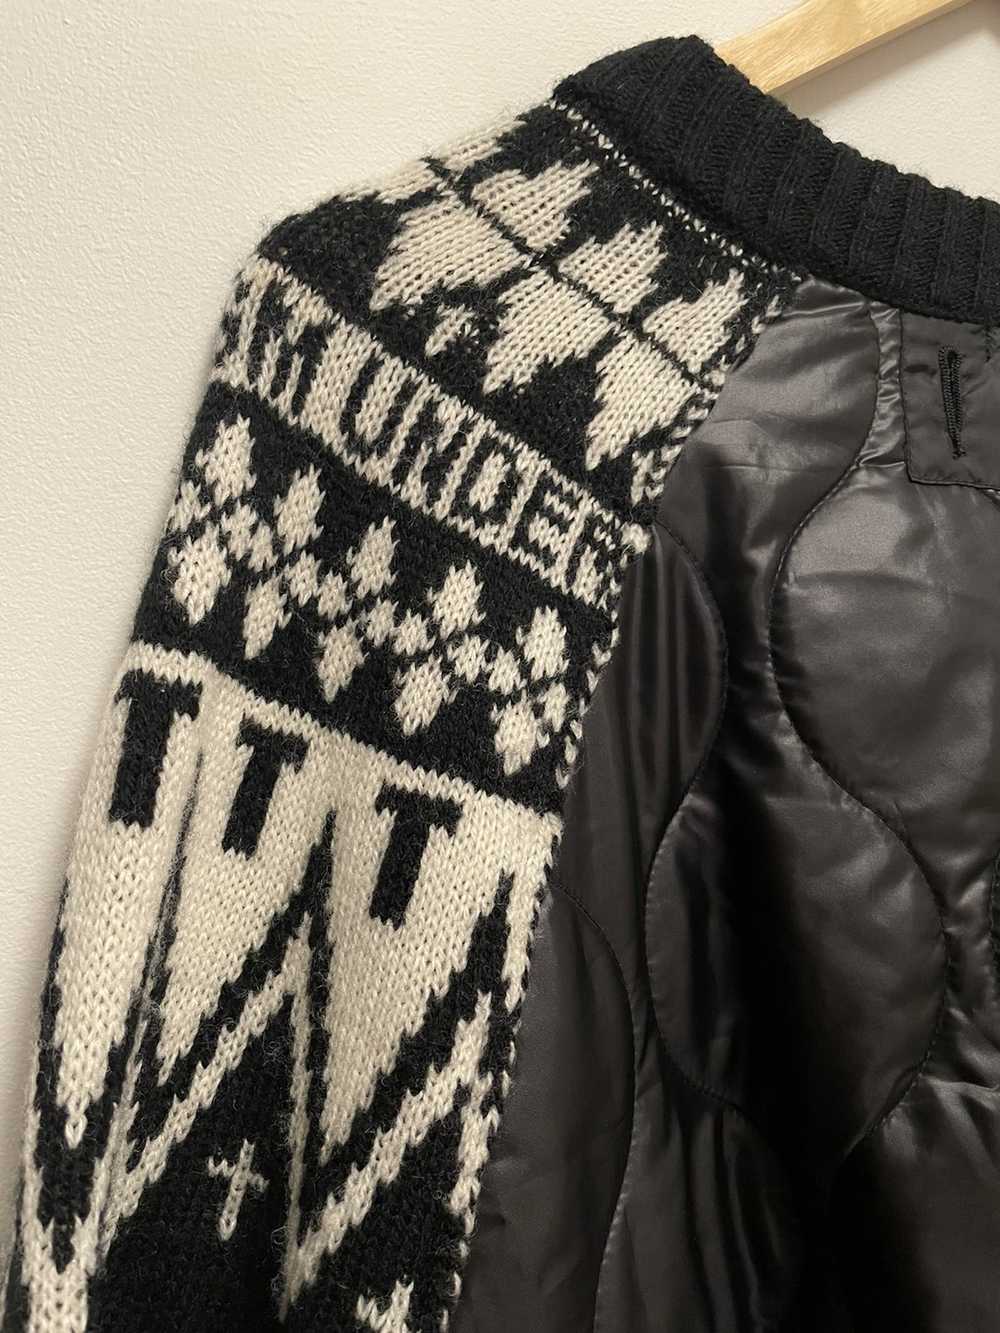 Undercover Undercoverism knit wear/sweater - image 4